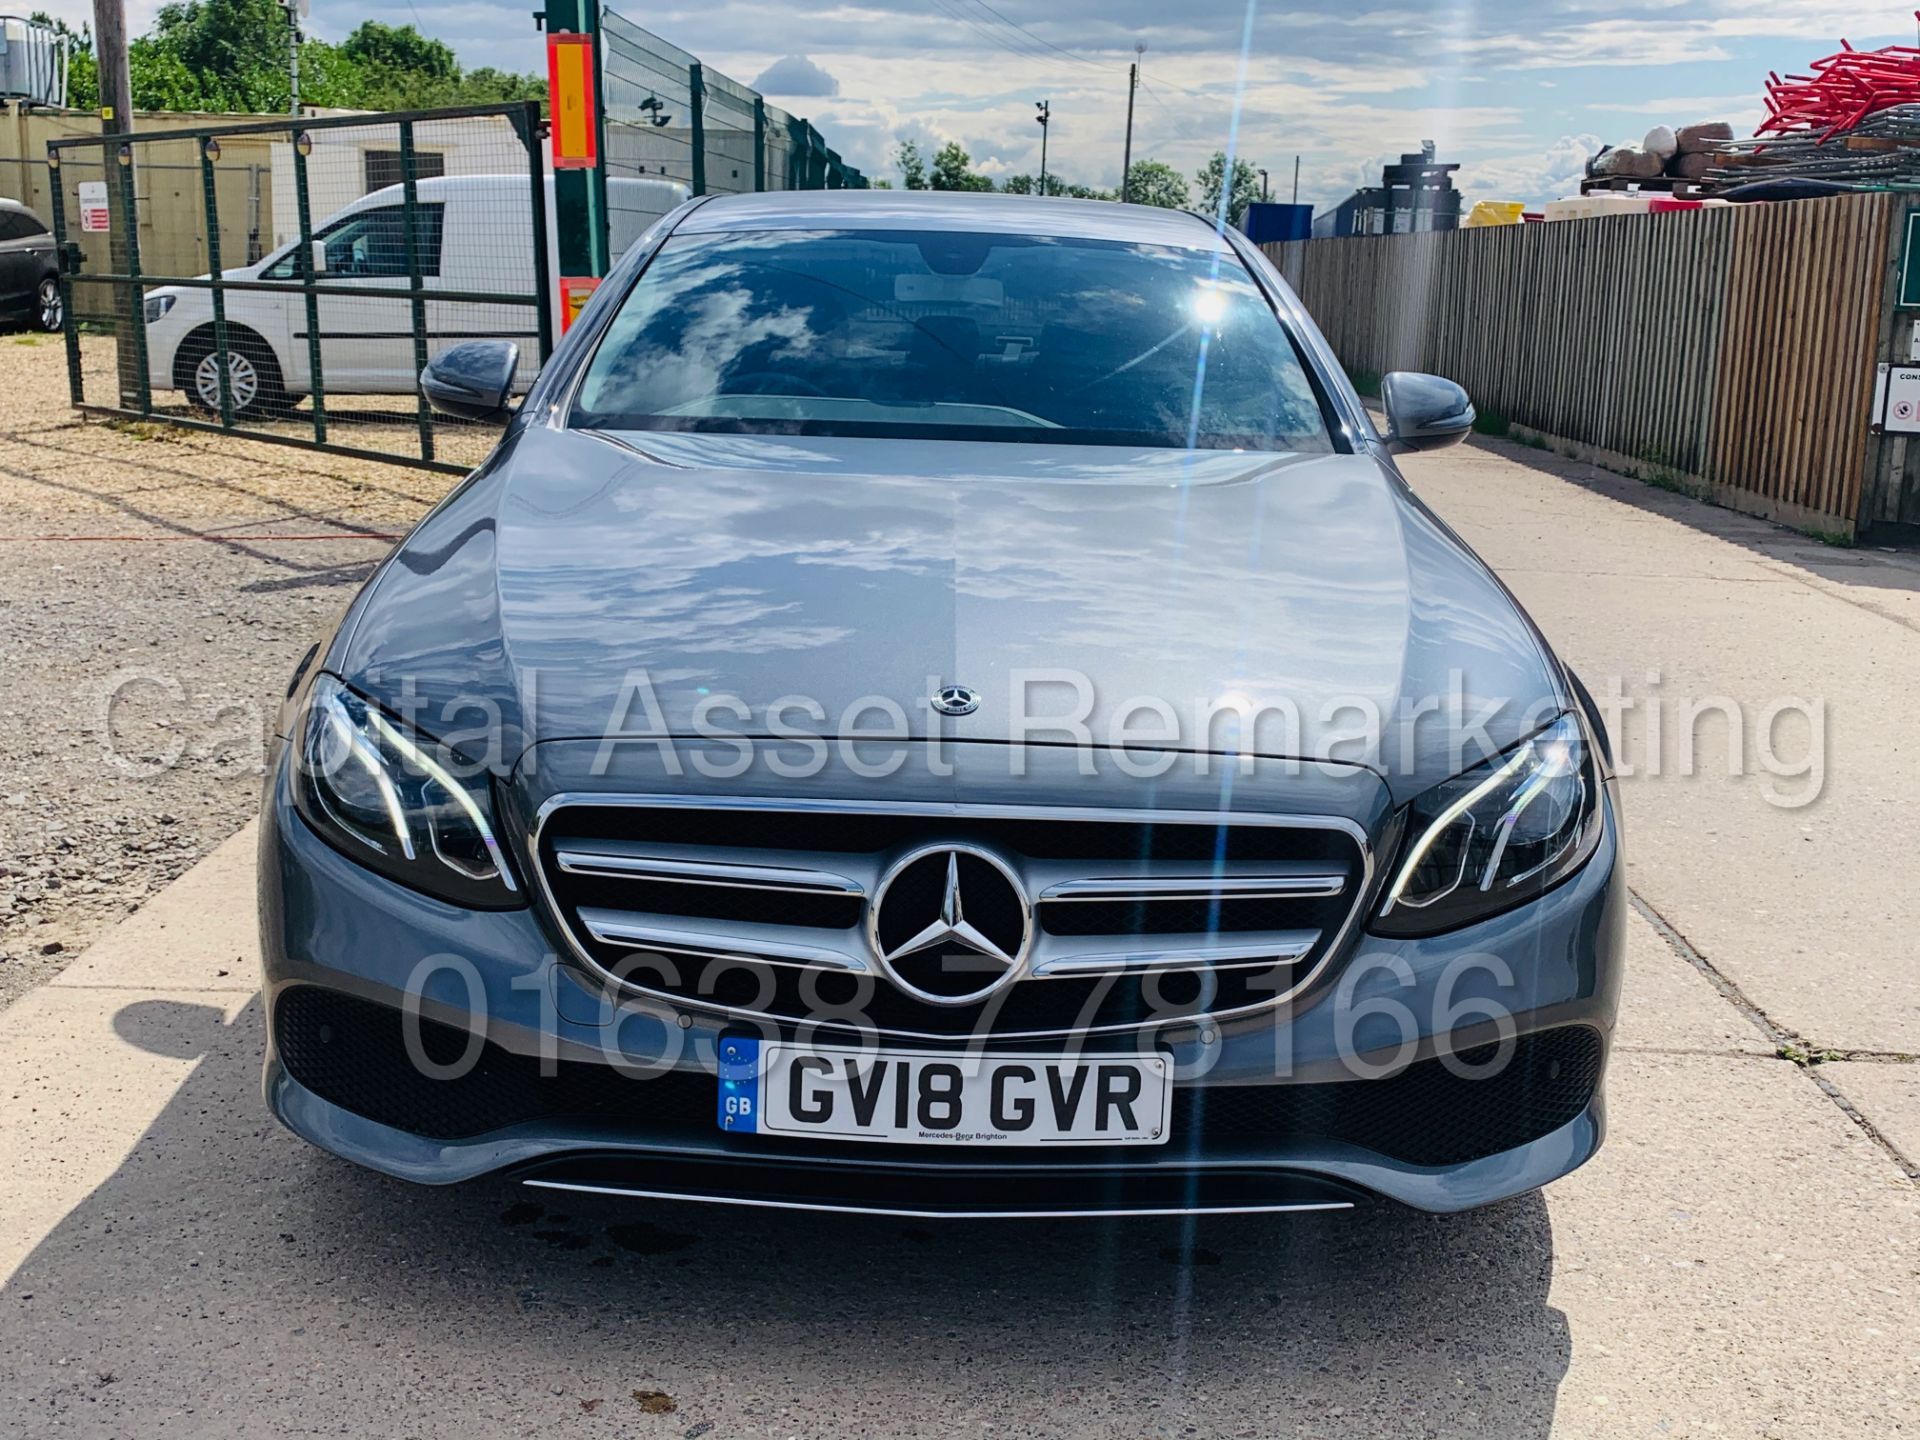 (On Sale) MERCEDES-BENZ E220D *SALOON* (2018 - NEW MODEL) '9-G TRONIC AUTO - LEATHER - SAT NAV' - Image 4 of 56